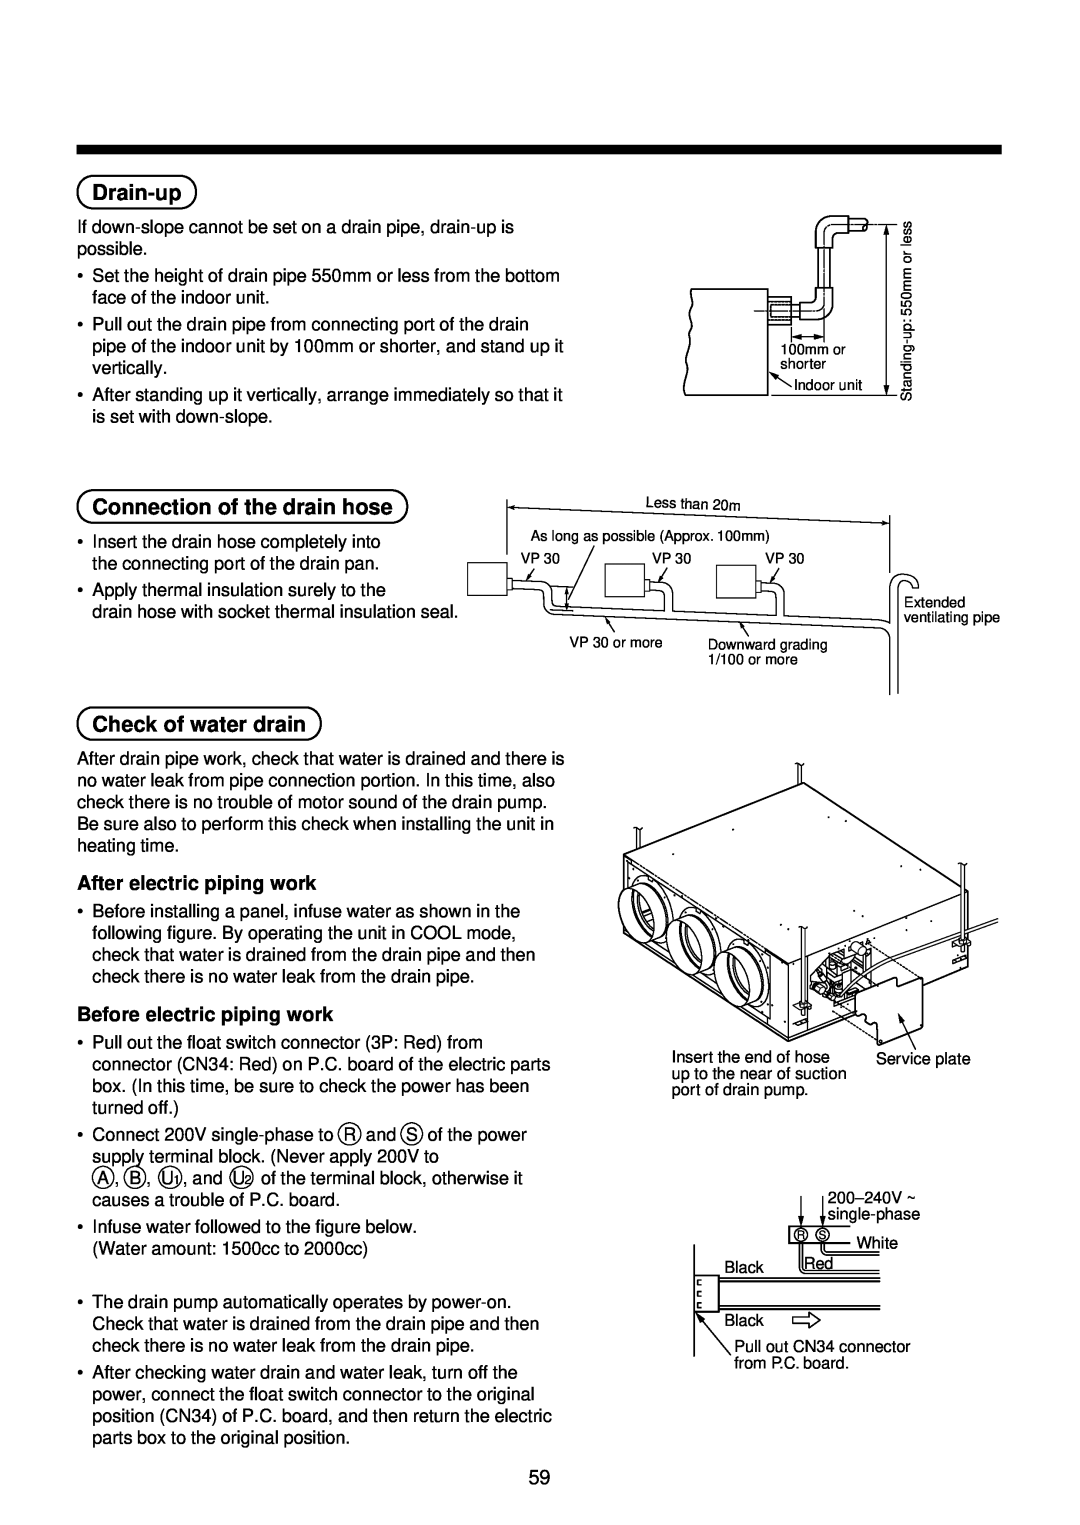 Toshiba R410A service manual Drain-up, Connection of the drain hose, Check of water drain, After electric piping work 